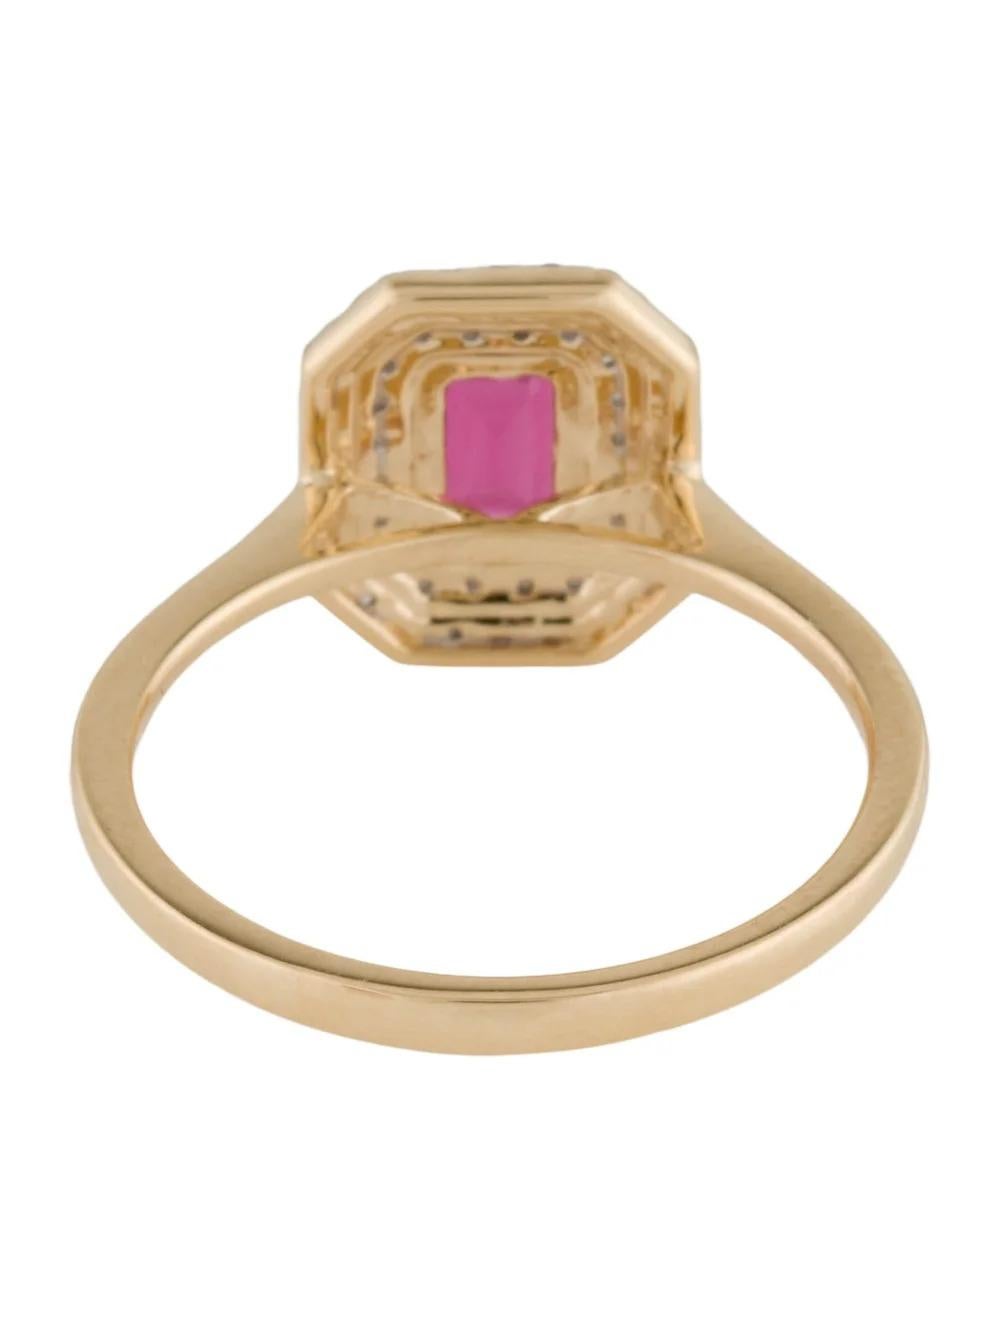 14K Tourmaline & Diamond Cocktail Ring, Size 6.25 - Stunning Statement Piece In New Condition For Sale In Holtsville, NY